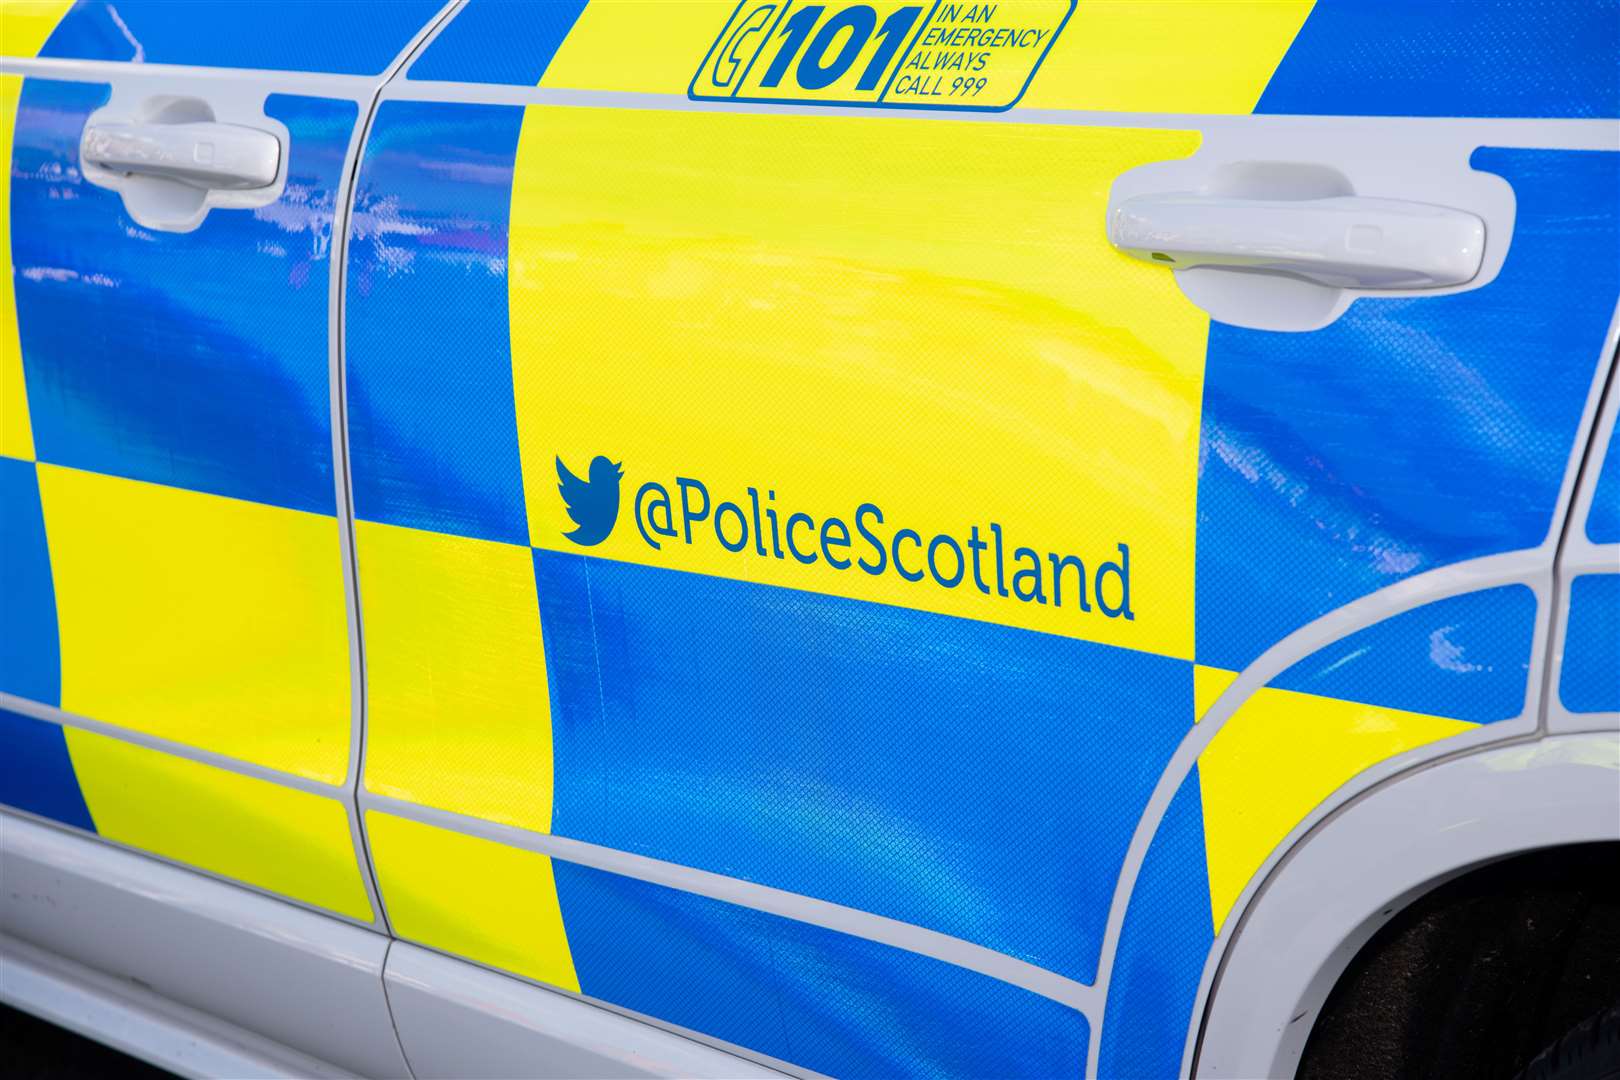 Police are appealing for information after the incident.